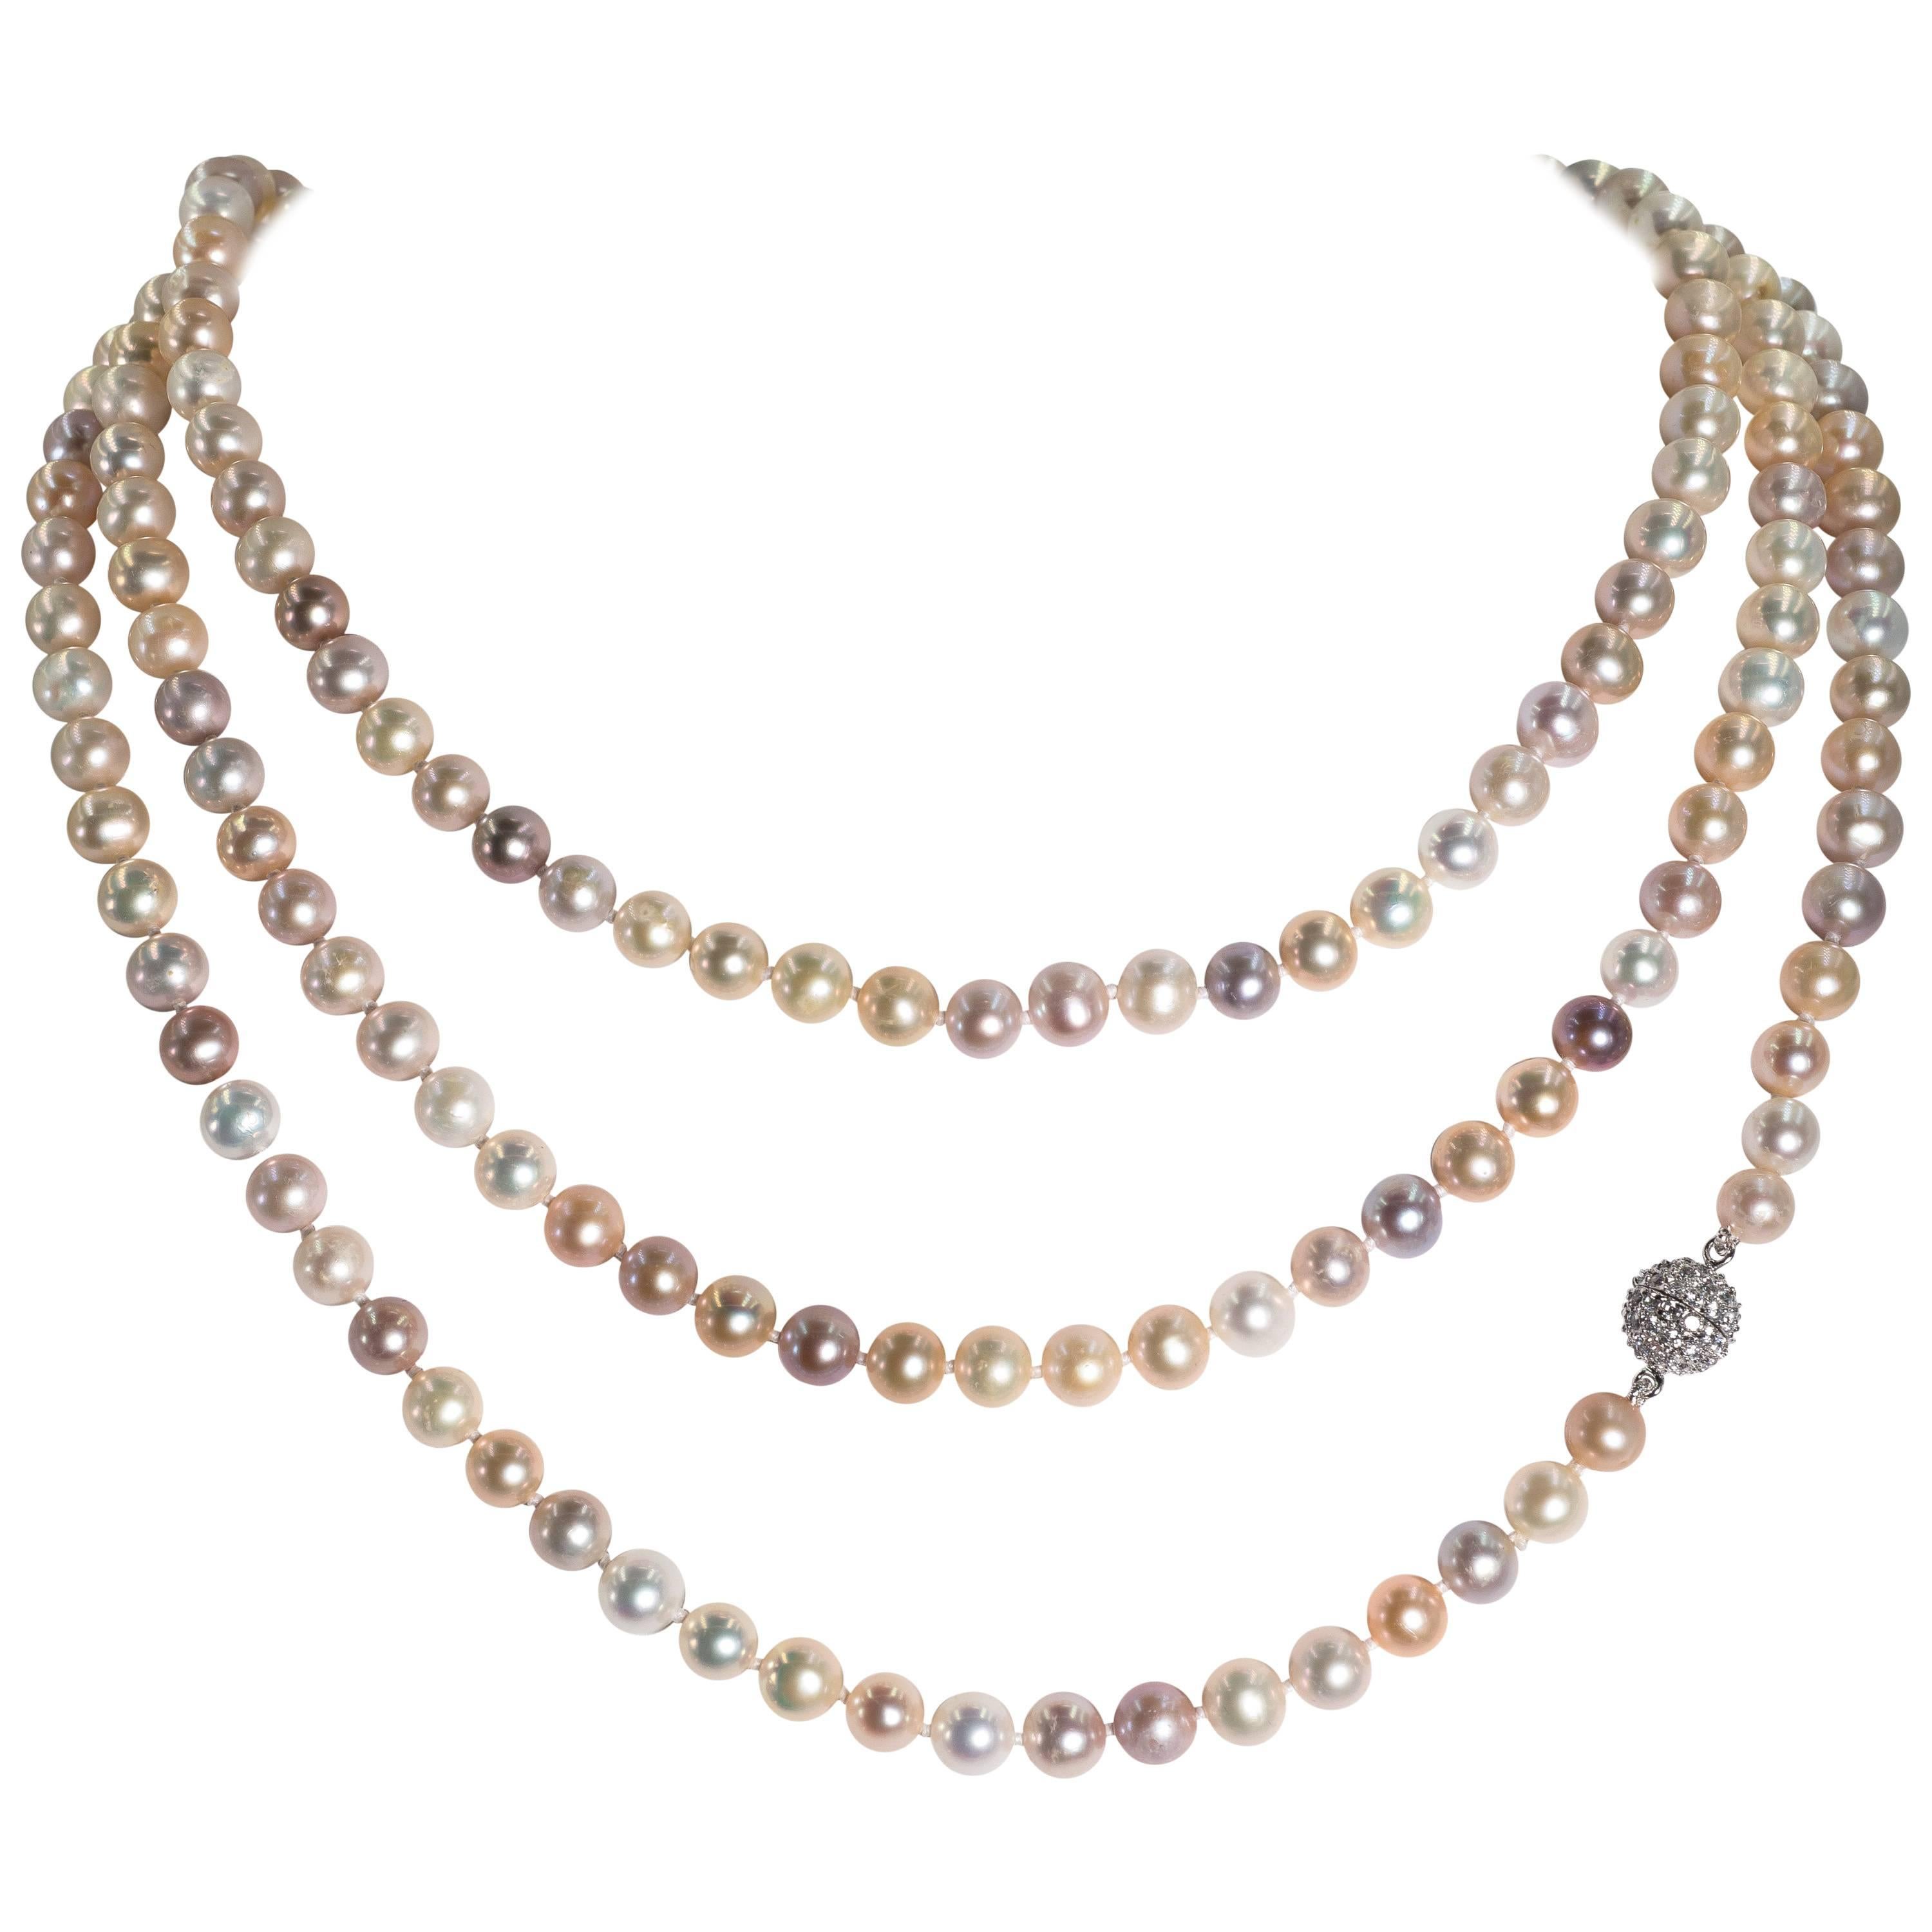 Elegant Sixty Inch Long Rope of Multi-shaded Freshwater Pearls